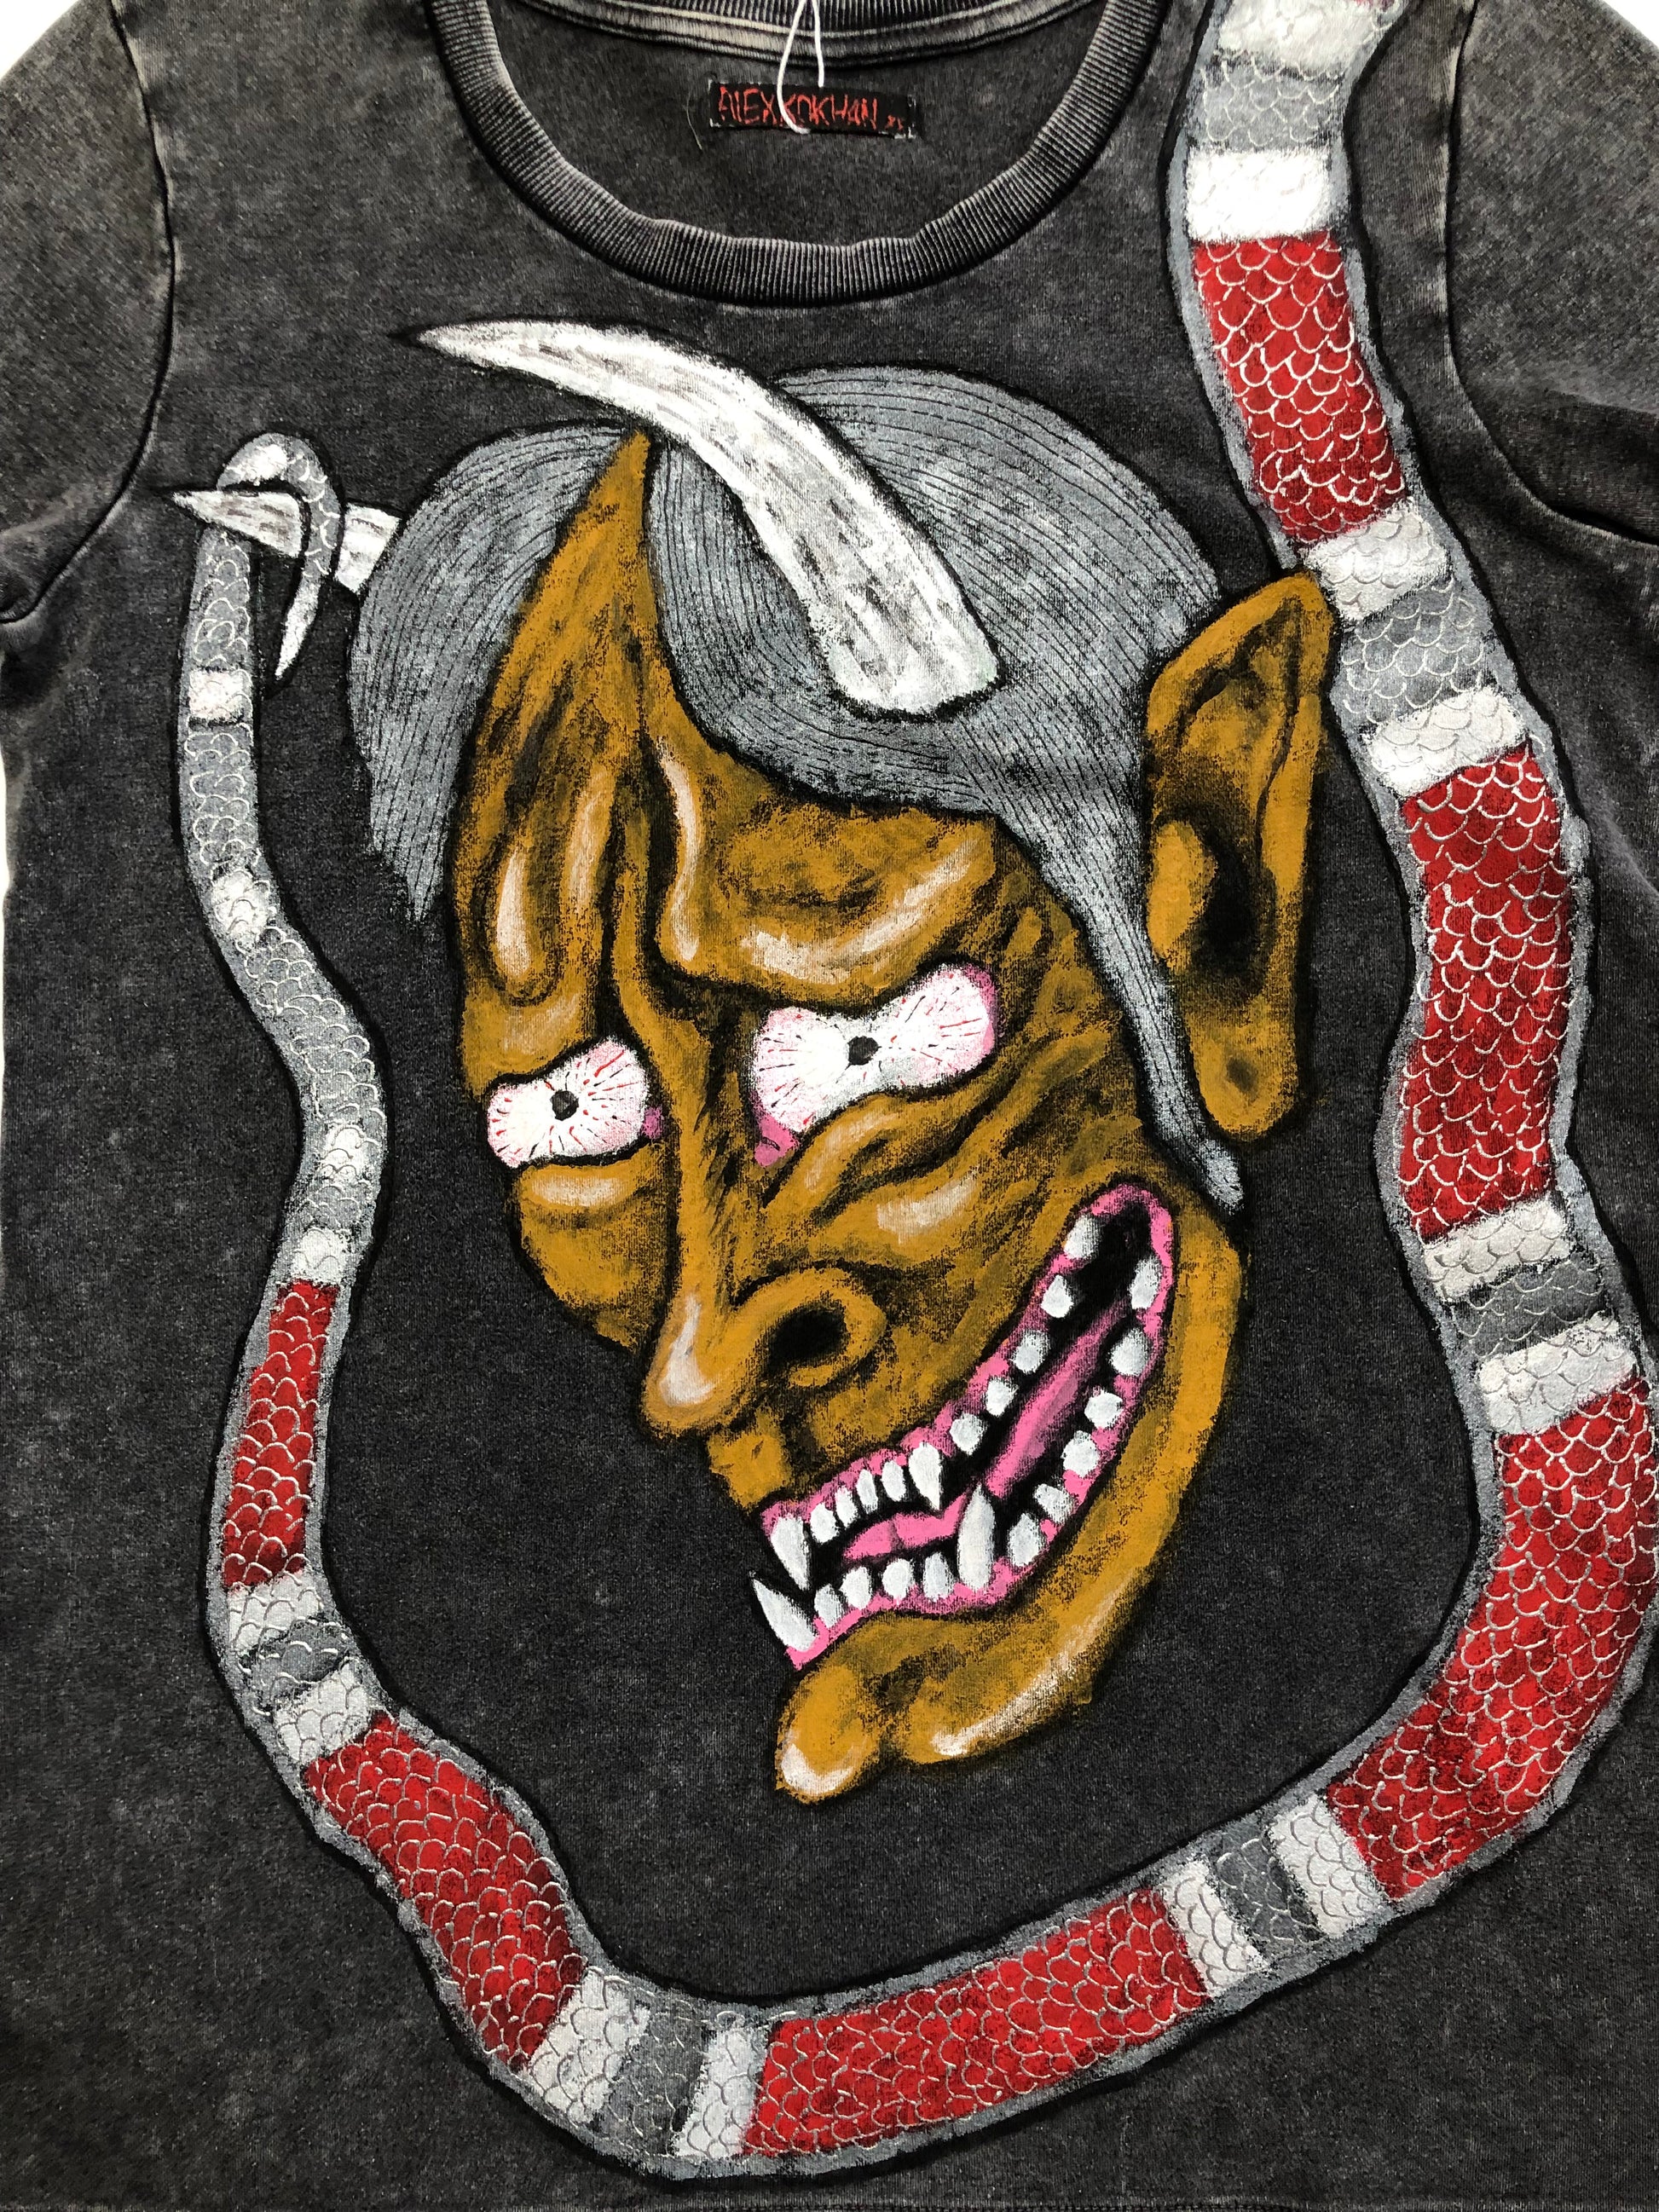 In detail Women's mask Hannya Demon T -shirt with a Snake.